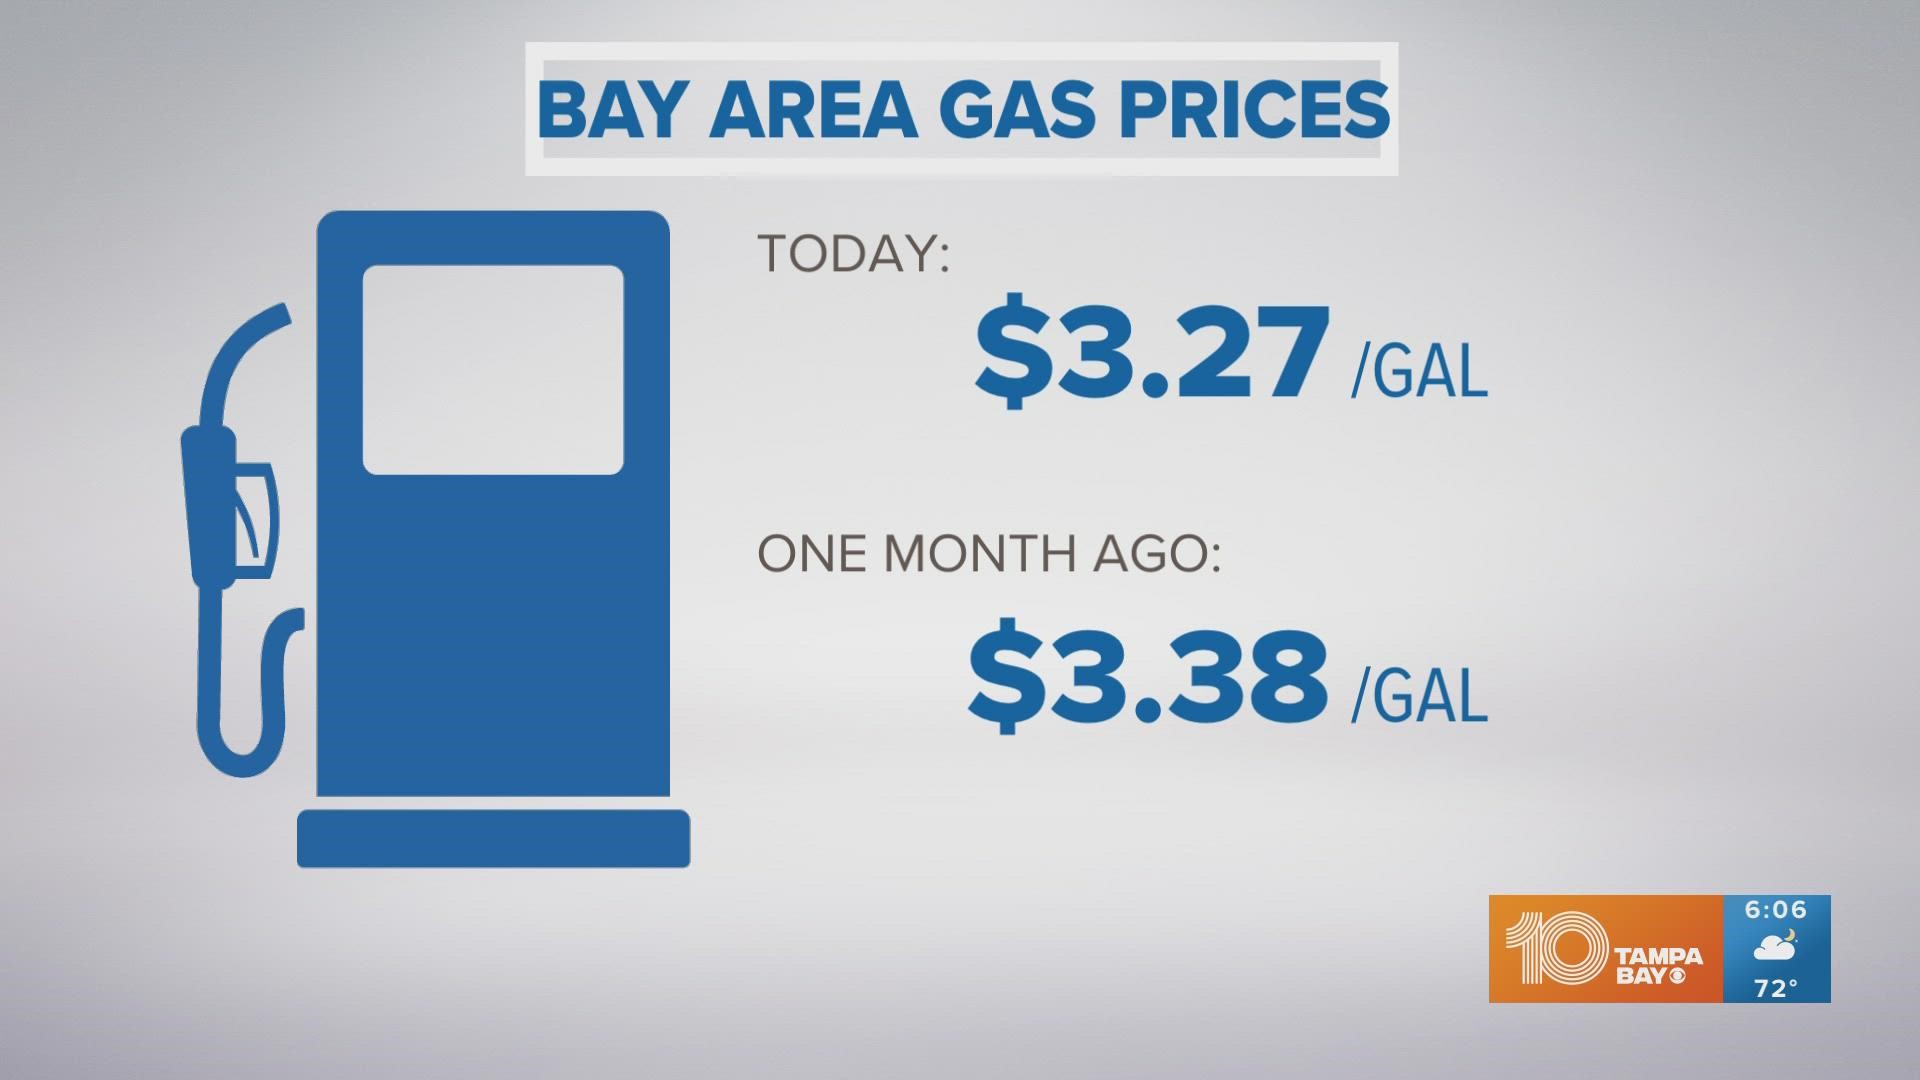 Gas prices are expected to jump as soon as the holiday ends.